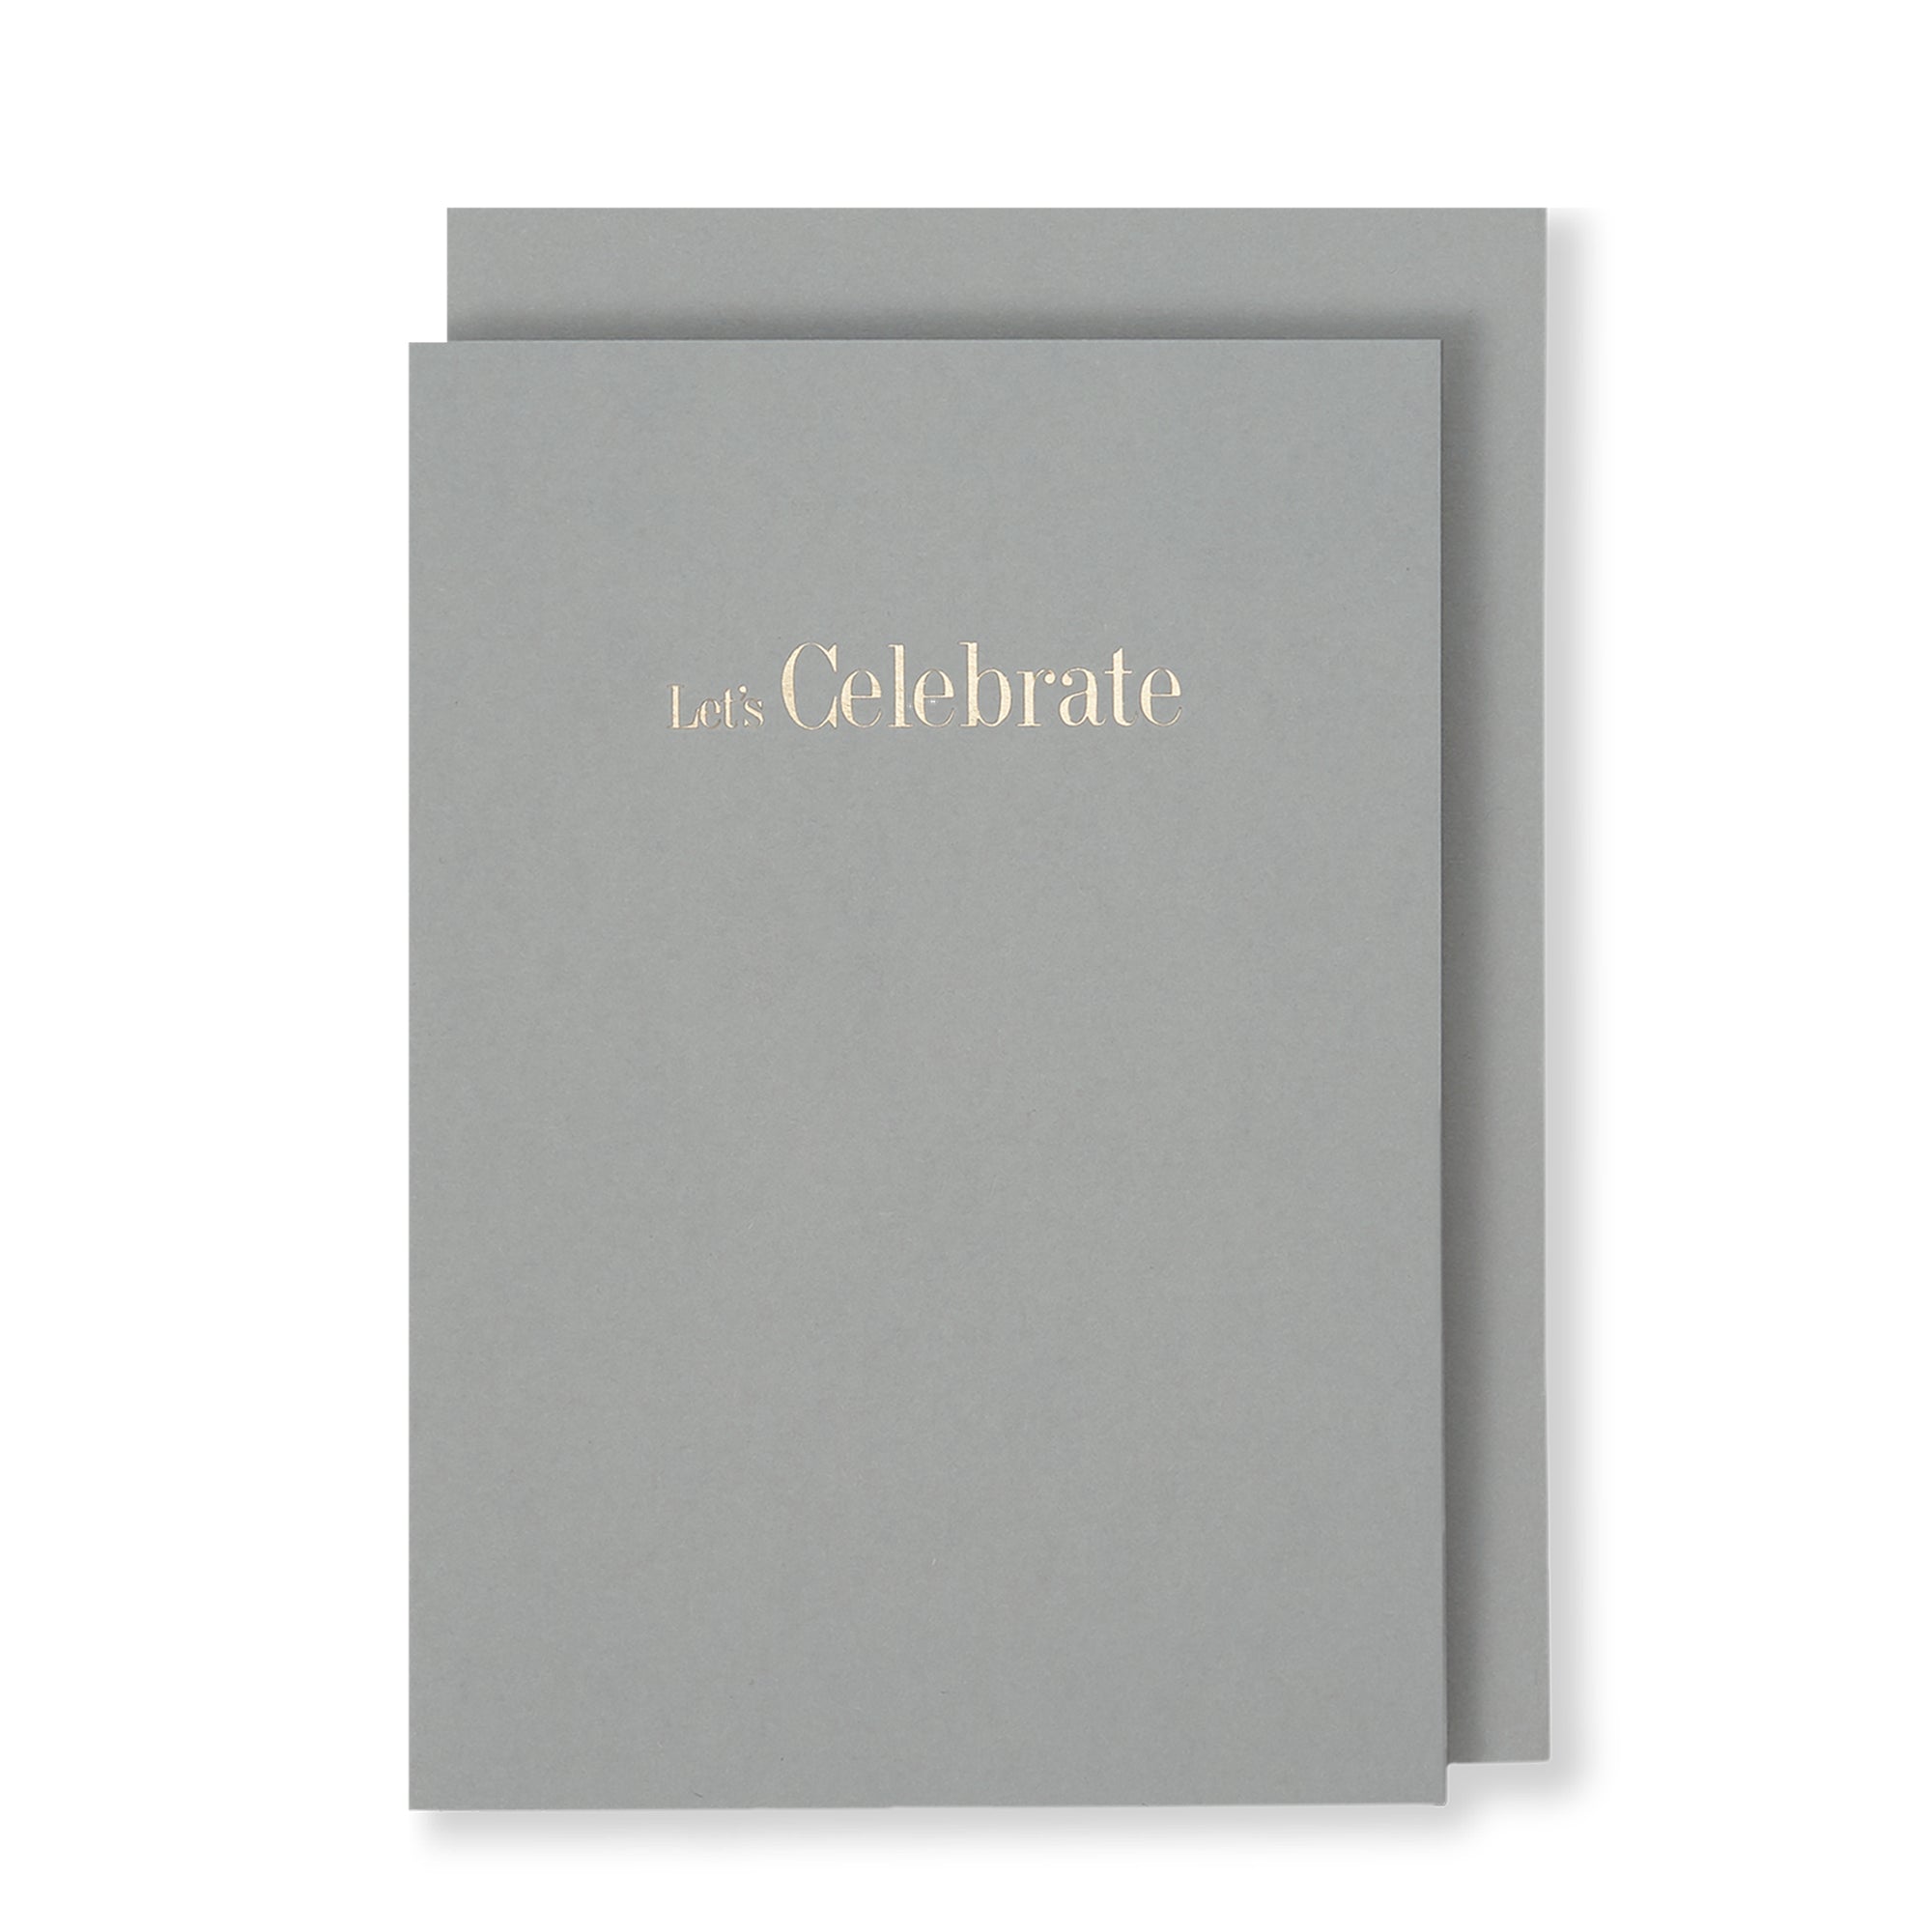 Let's Celebrate Greeting Card in Grey, Front